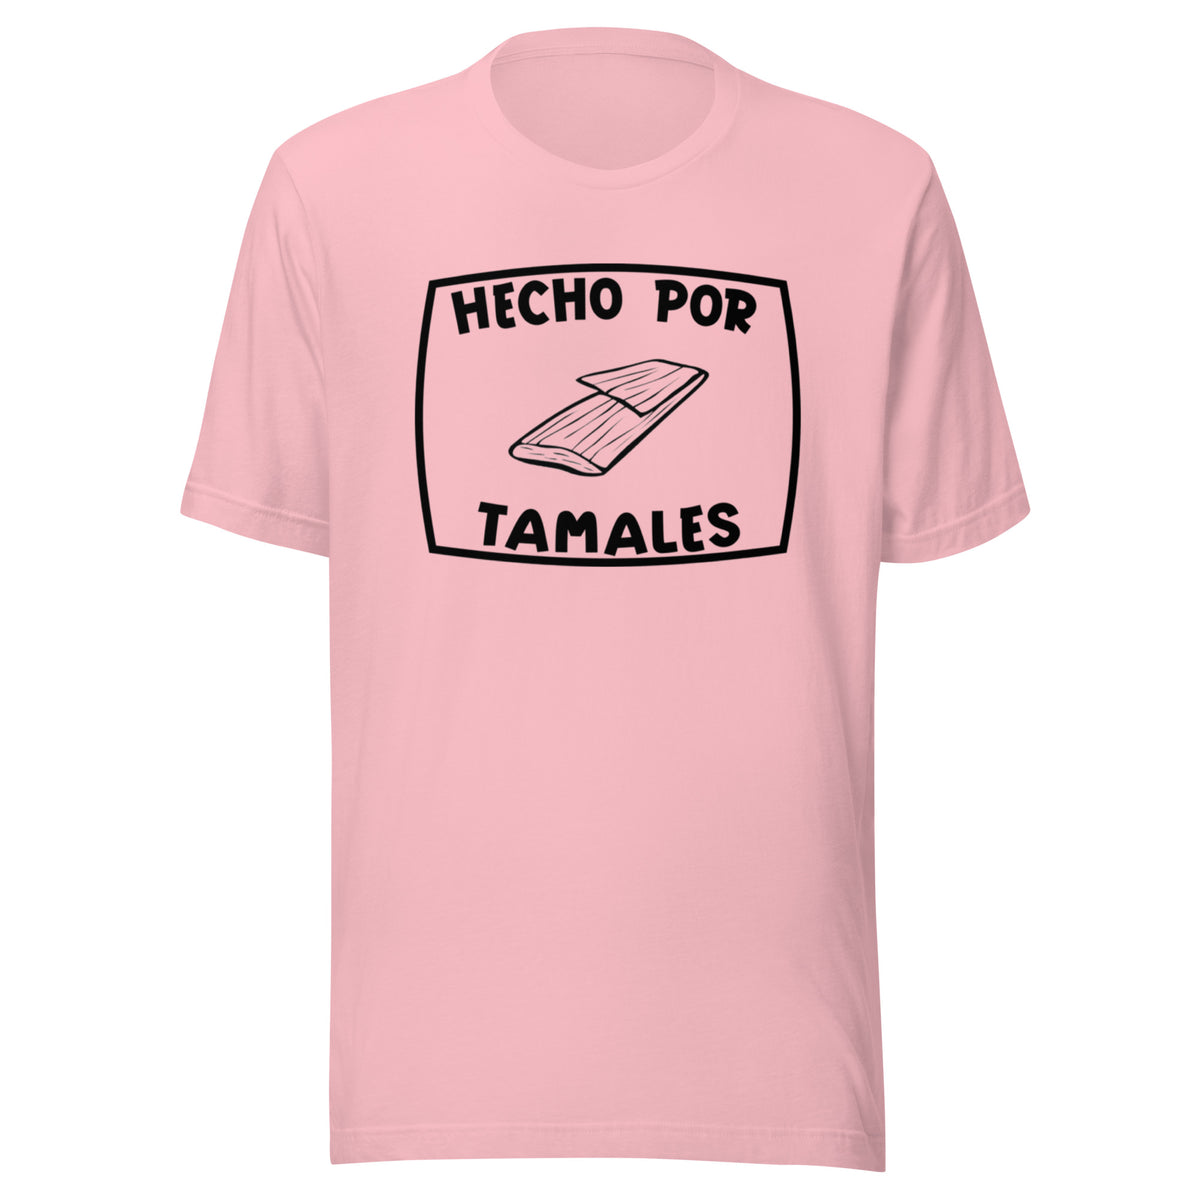 Hecho Por Tamales T-shirt (Made by Tamales)